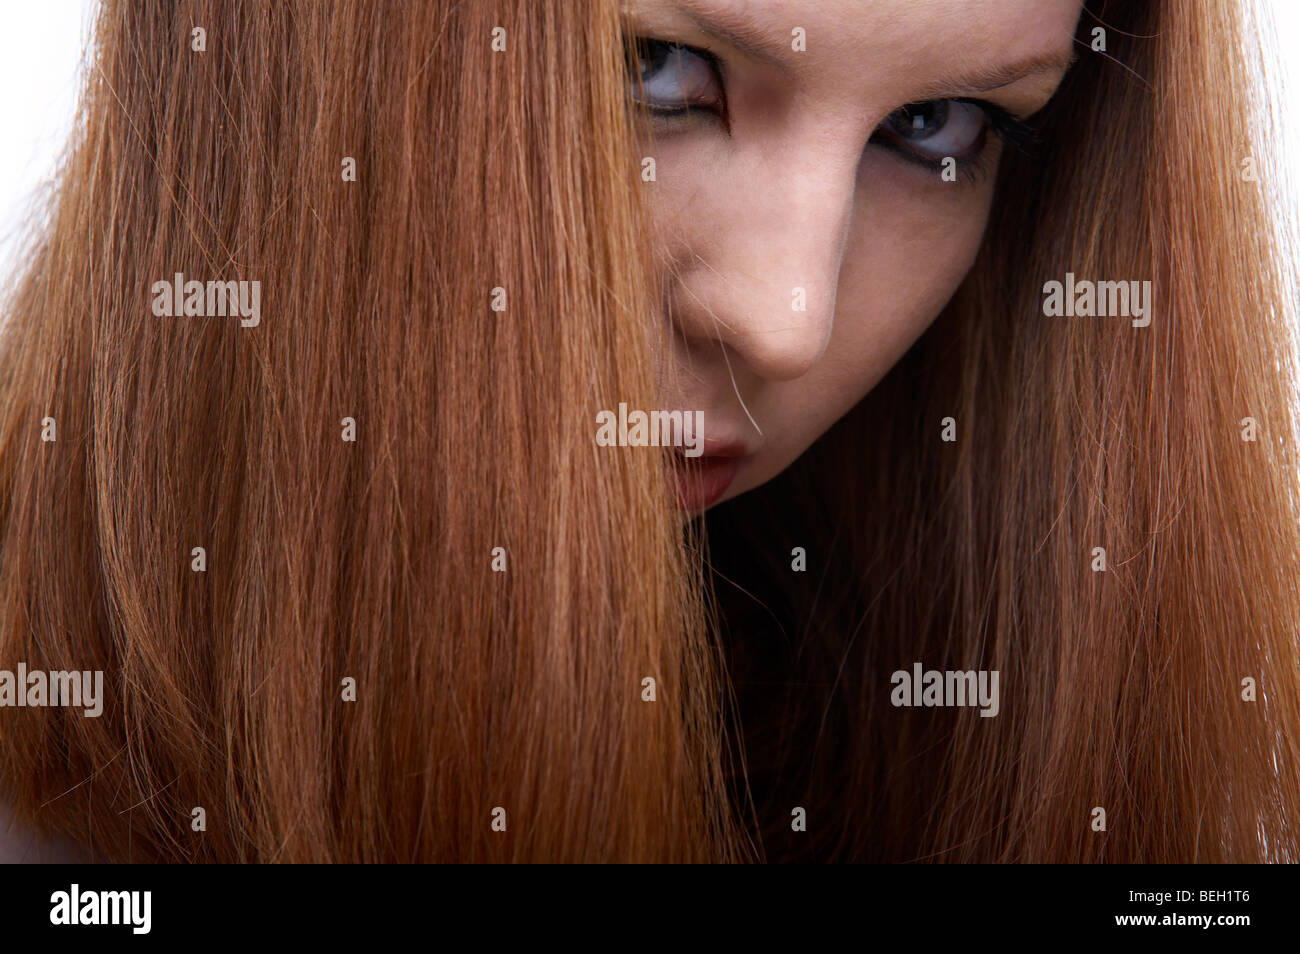 close-up portrait of beautiful redhead pale skinned model turns and looks frowningly Stock Photo